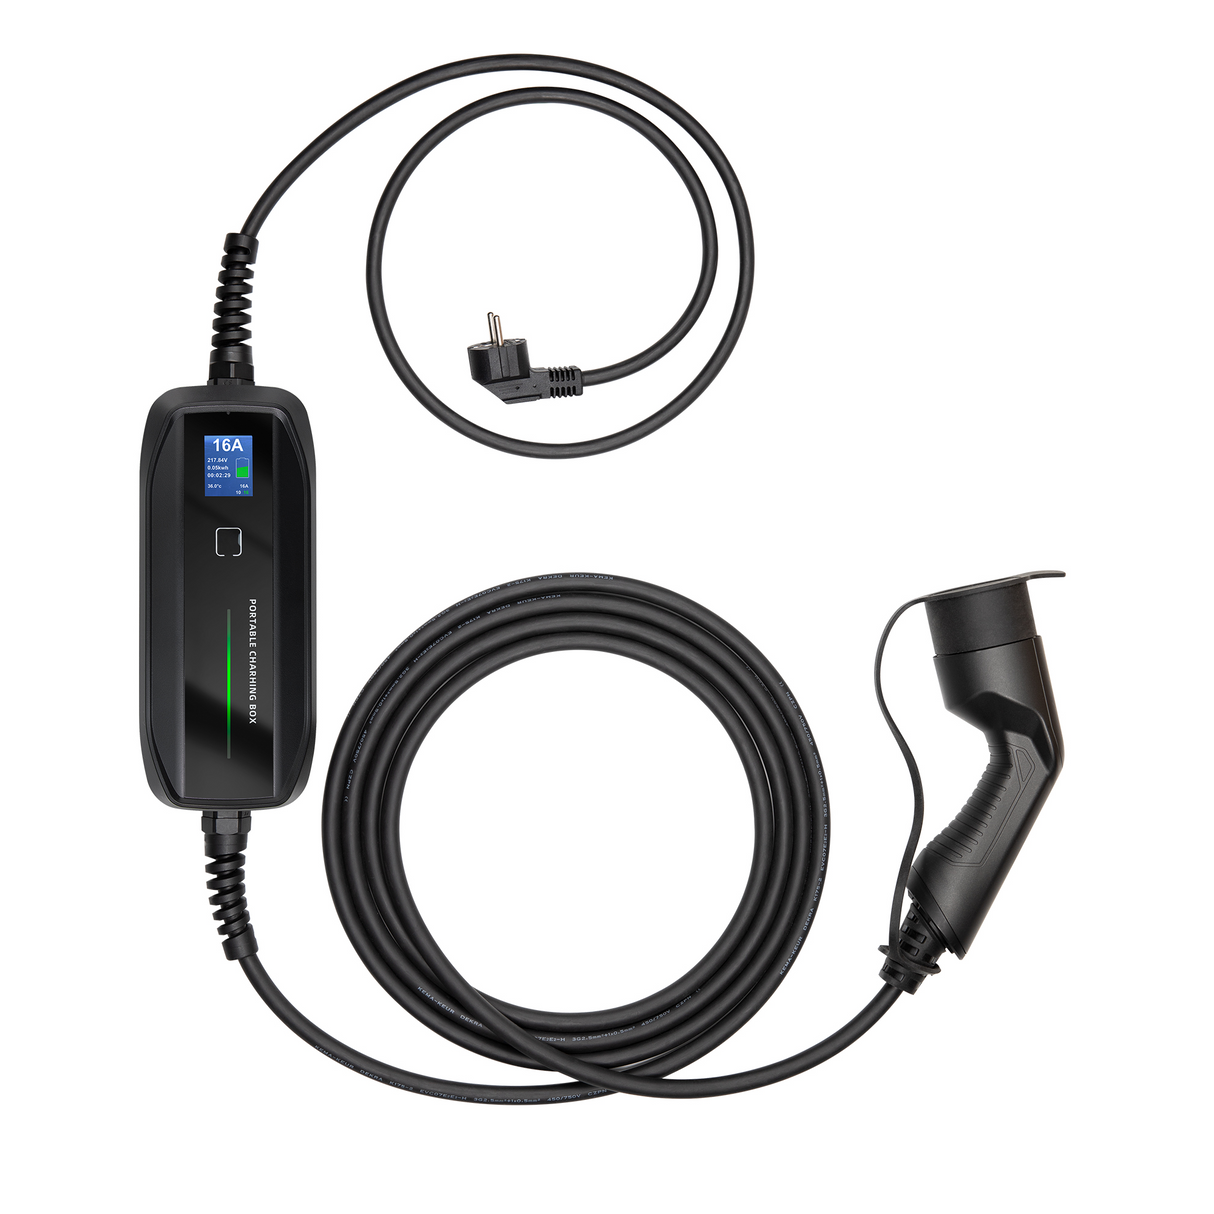 Mobile Charger Hyundai Tucson - Besen with LCD - Type 2 to Schuko